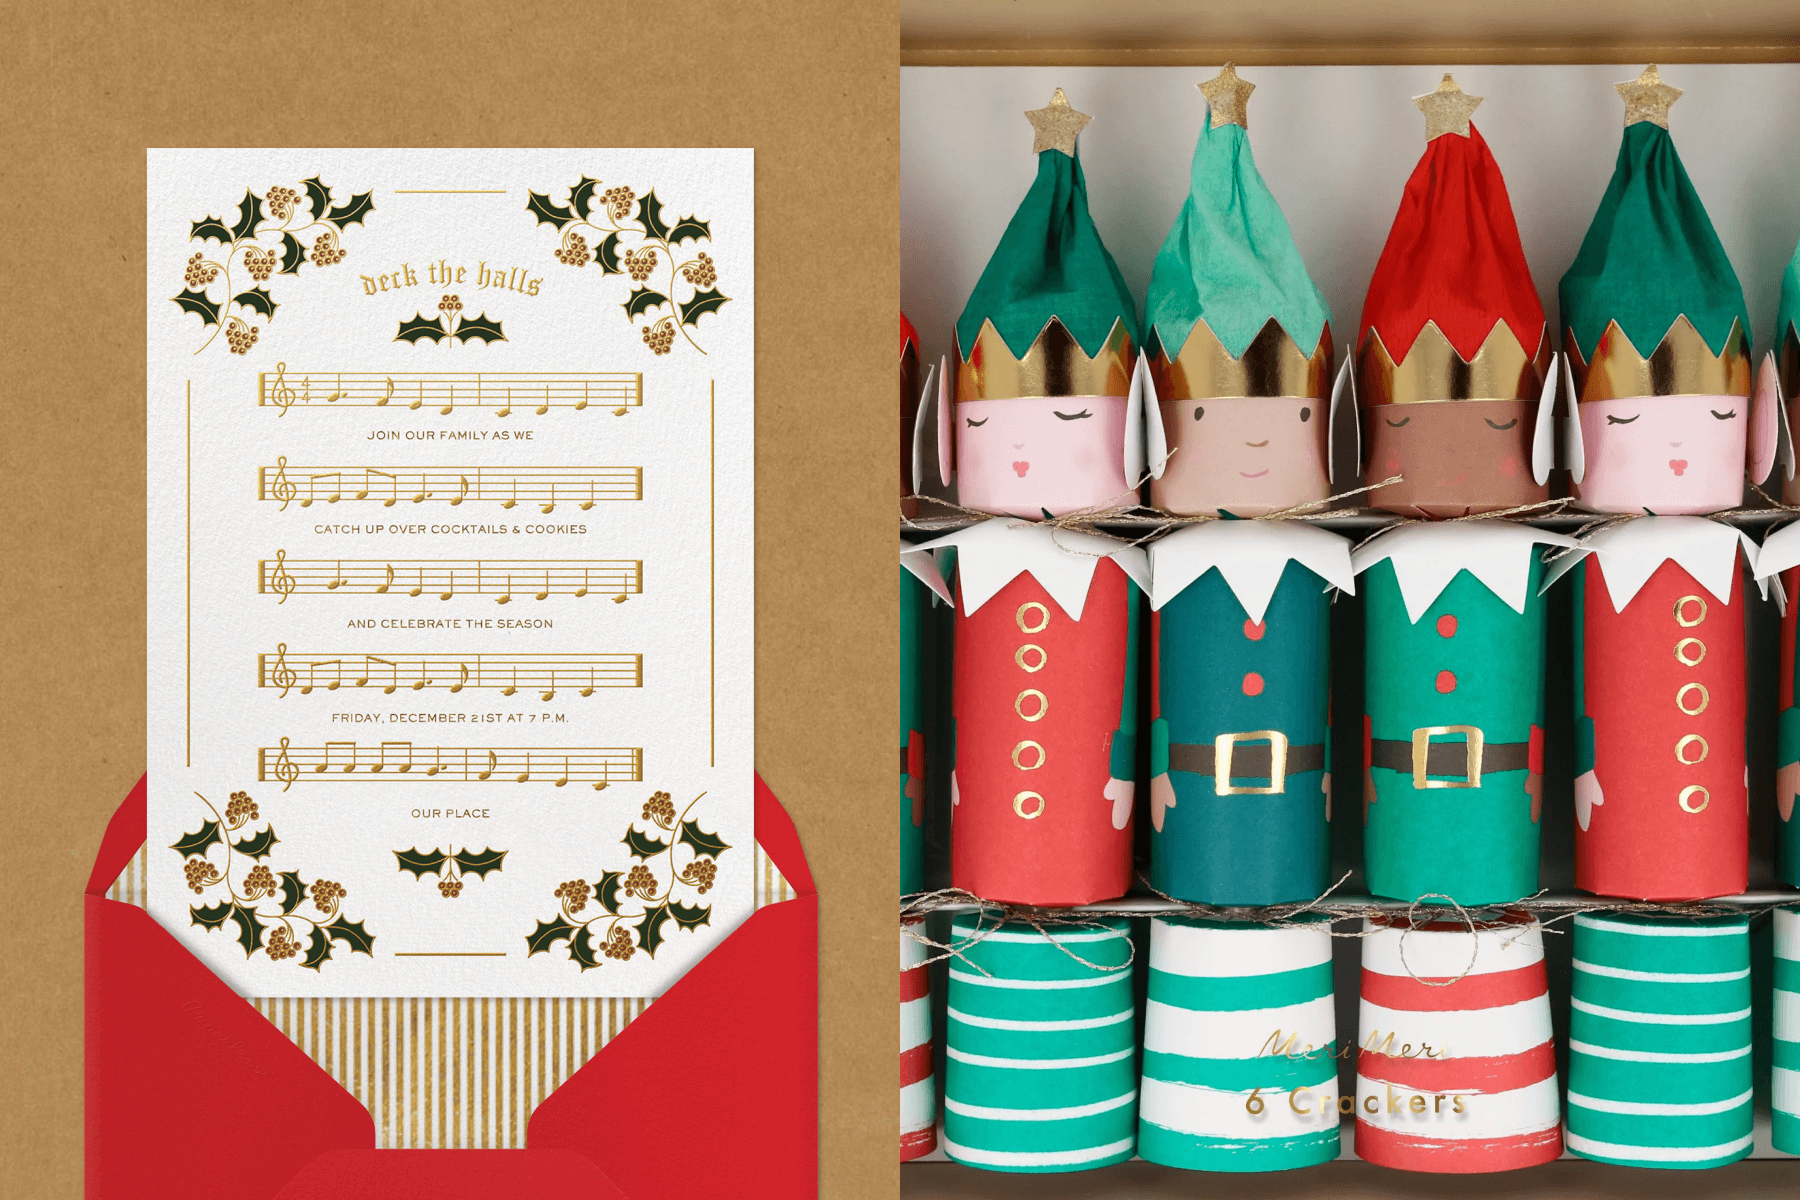 Left: A white Christmas invitation featuring a decorated sheet music motif; right: A close up photo of festive crackers shaped like Christmas elves.